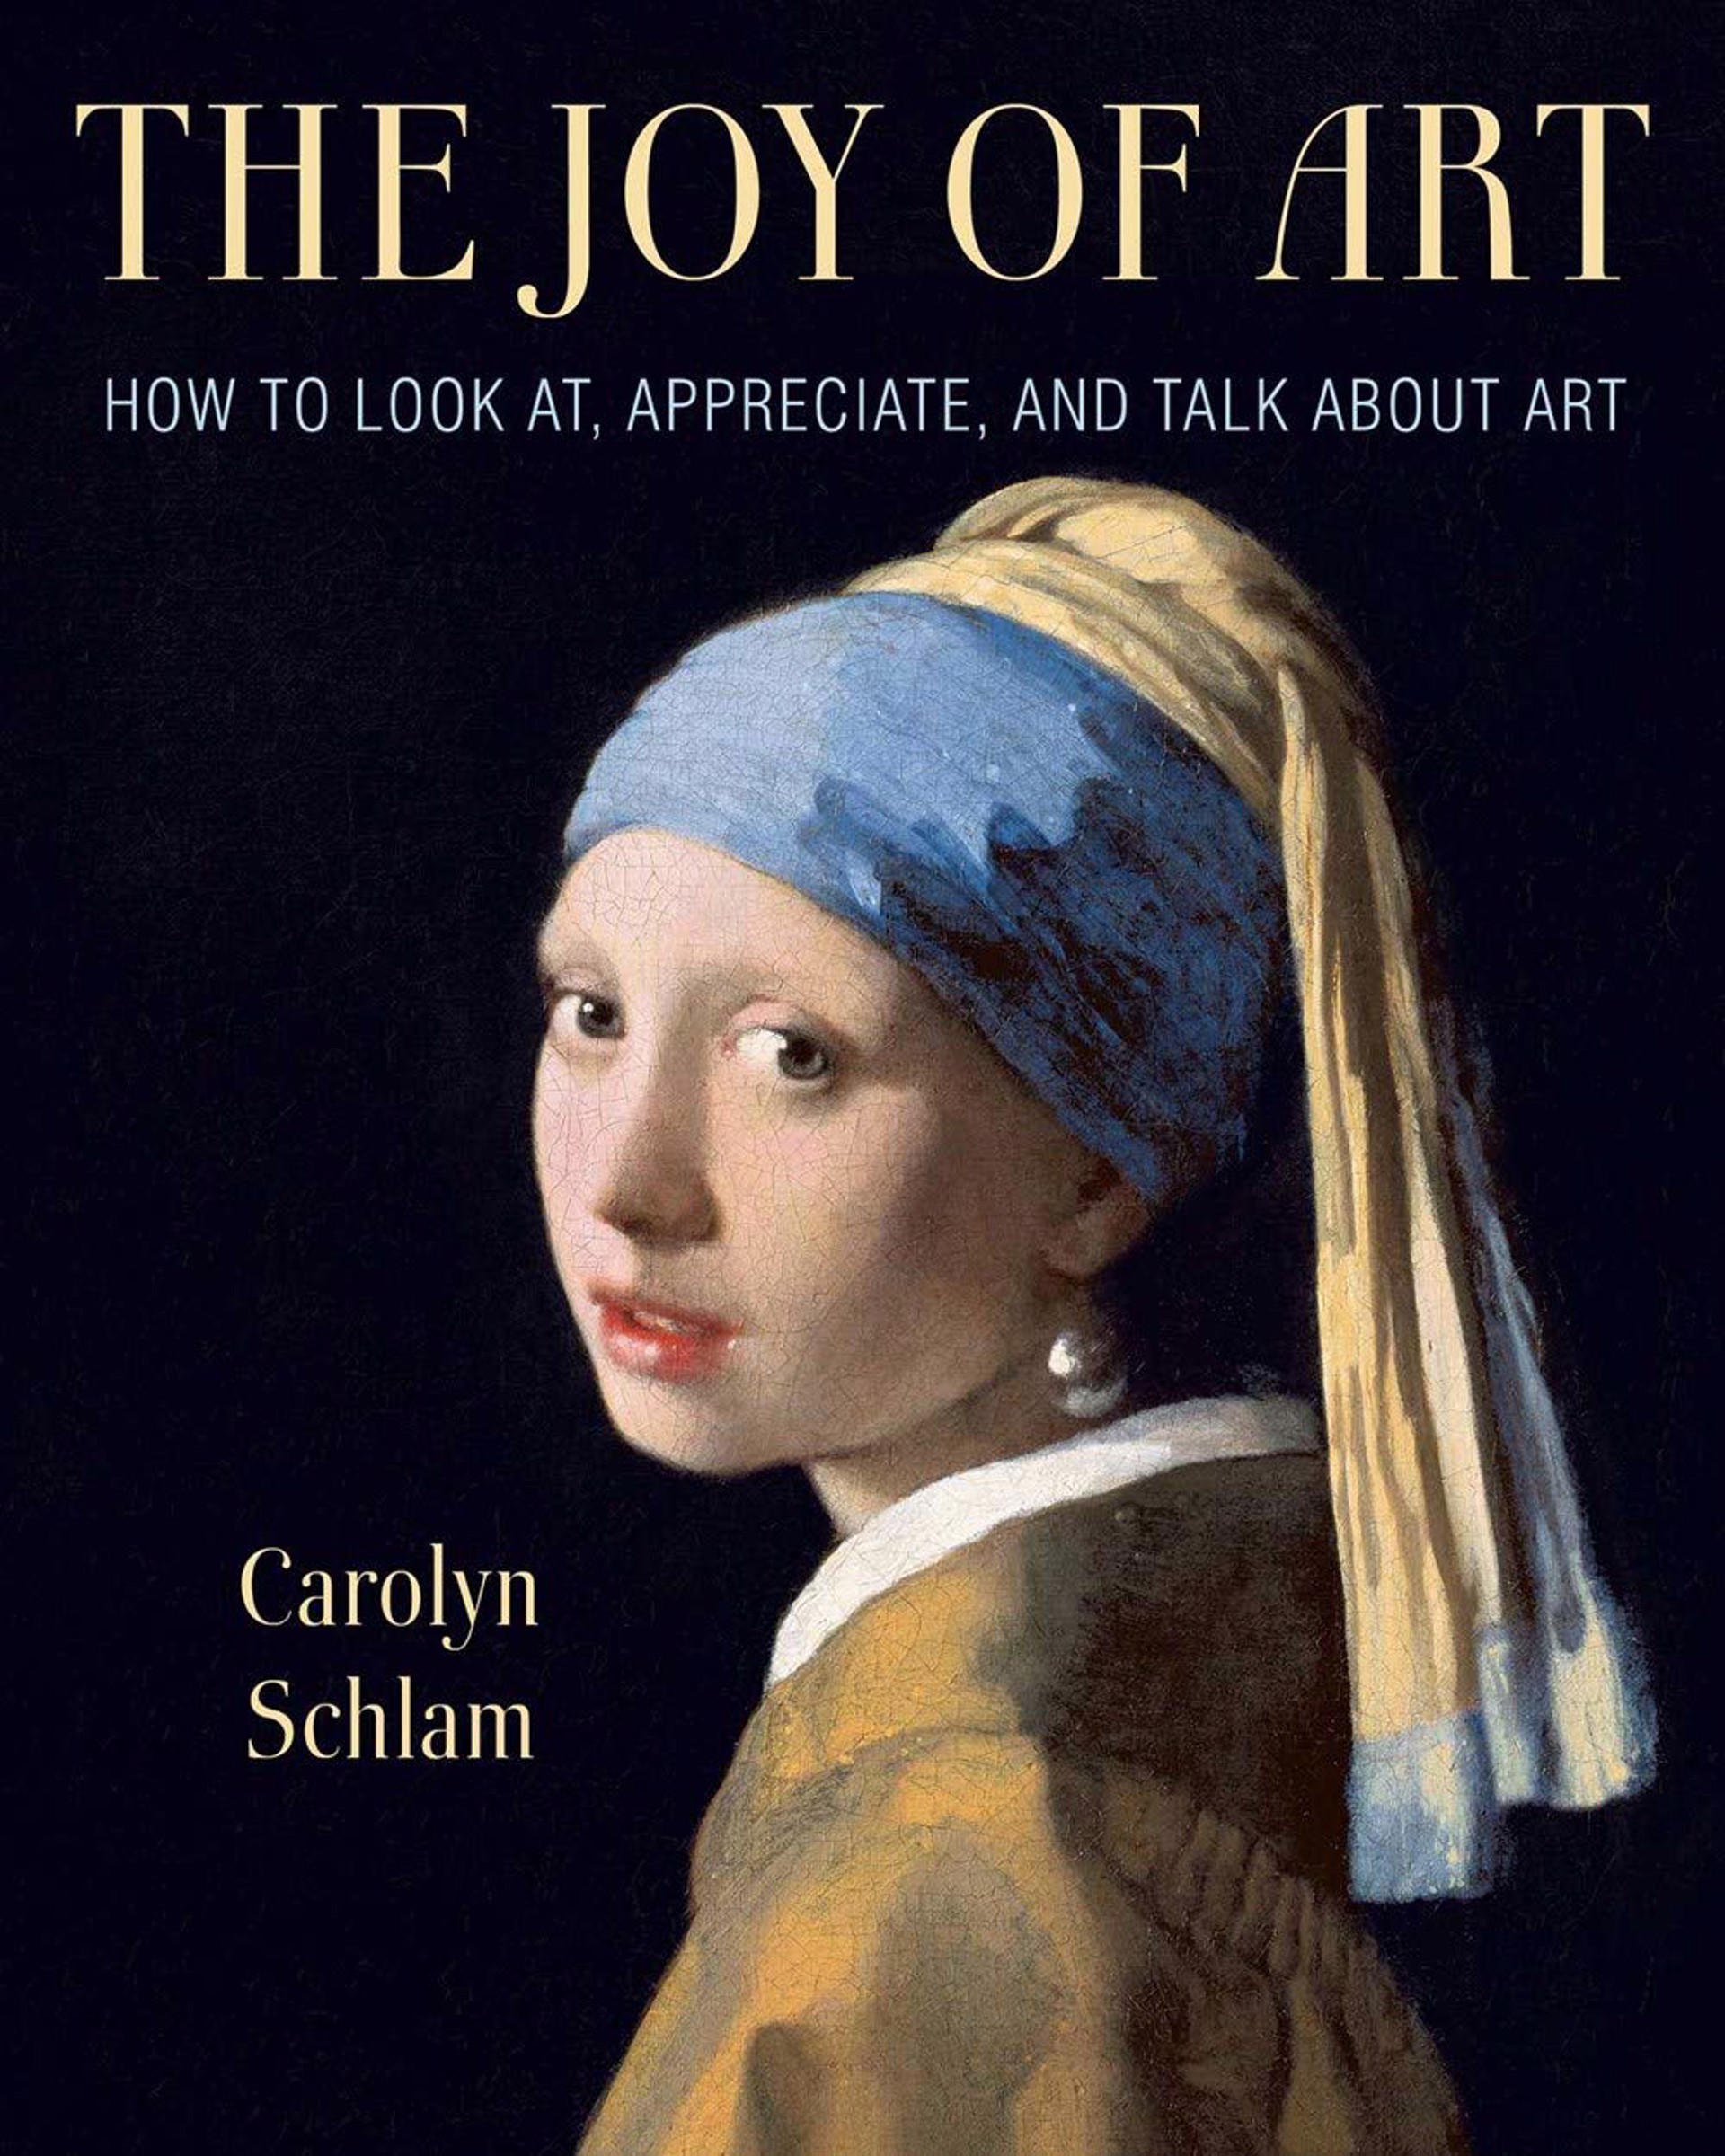 The Joy of Art Hardcover by Carolyn Schlam Author